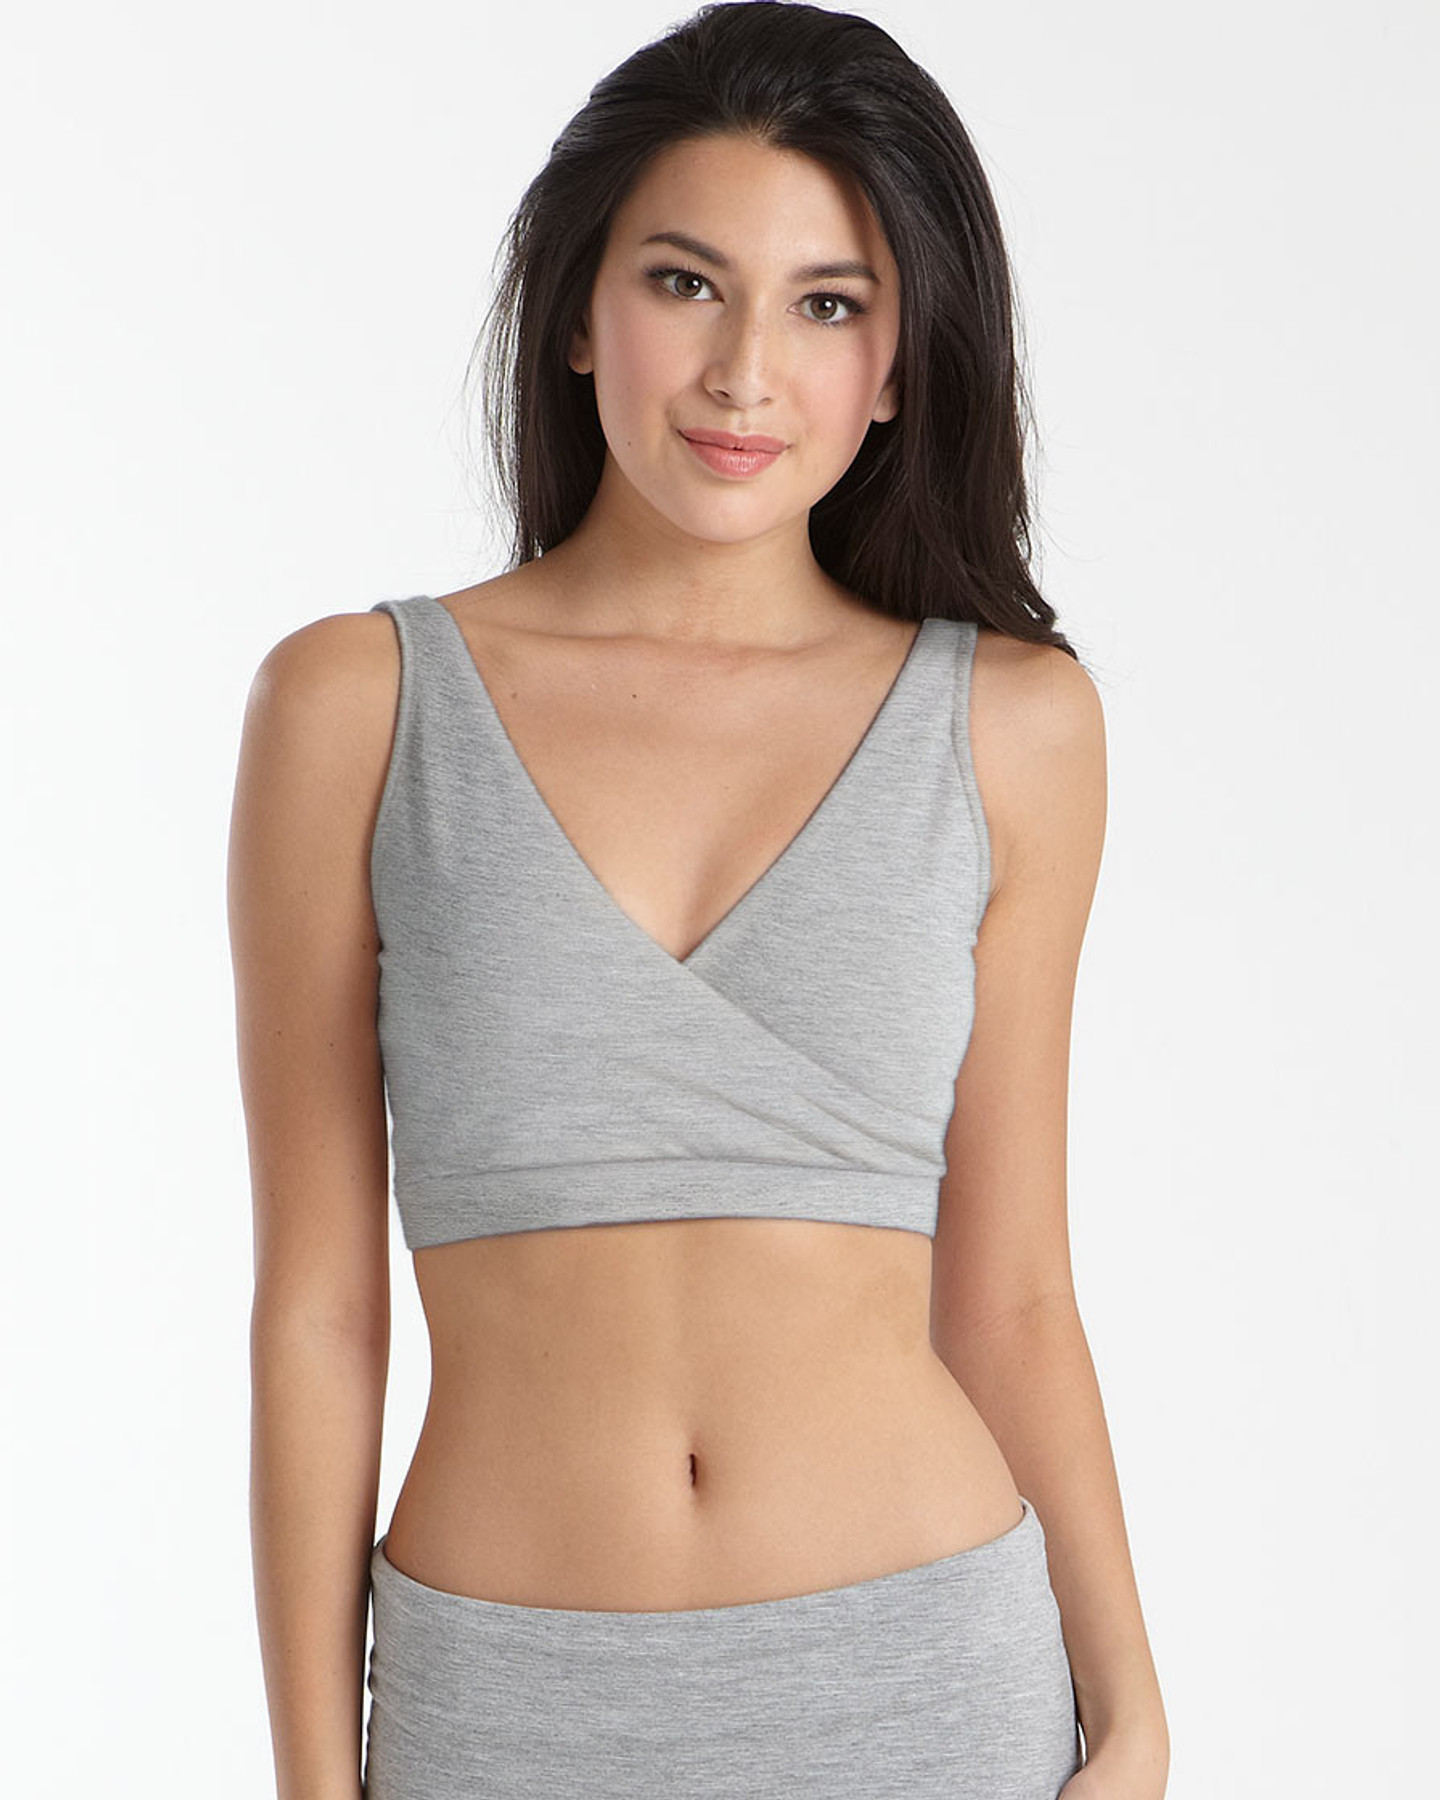 https://cdn11.bigcommerce.com/s-w561uic0dl/images/stencil/1800x1800/products/4097/6019/cross-front-cotton-sleep-bra_3142_heather-grey_cropped-view_1_1__67455.1598276121.jpg?c=1